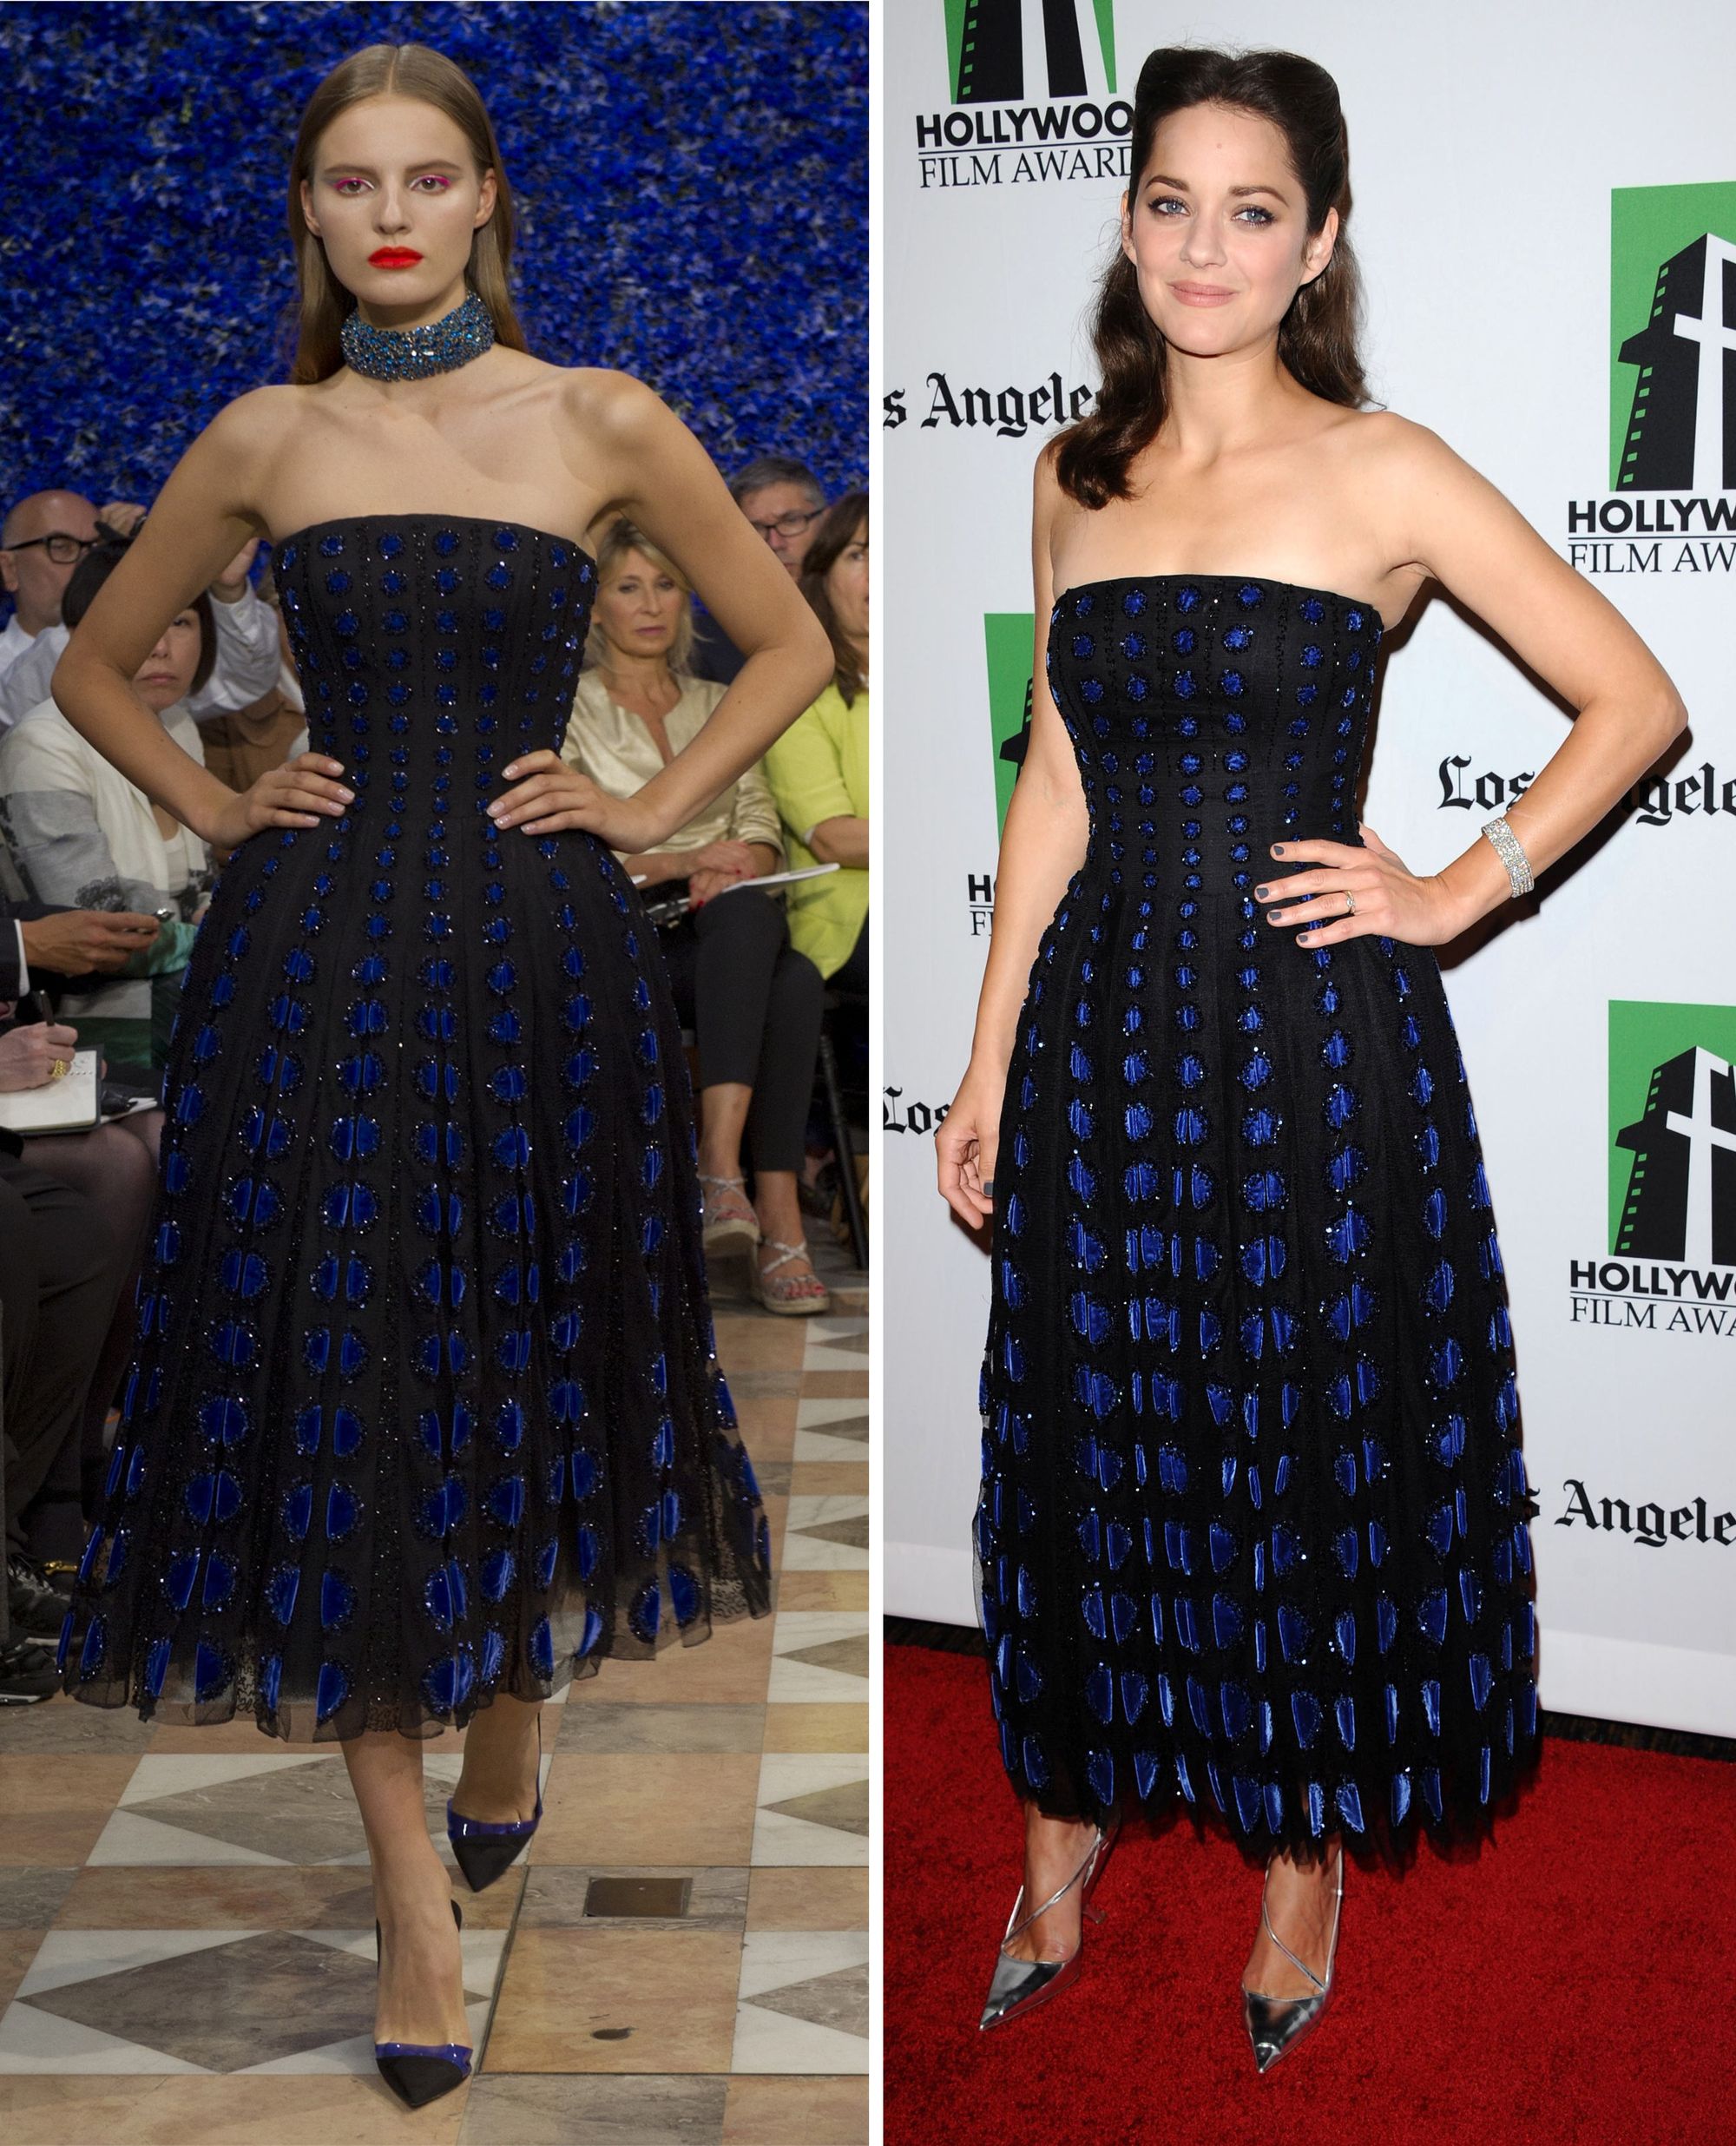 Spotted: Marion Cotillard in Christian Dior Autumn 2012 Couture, Once Again!